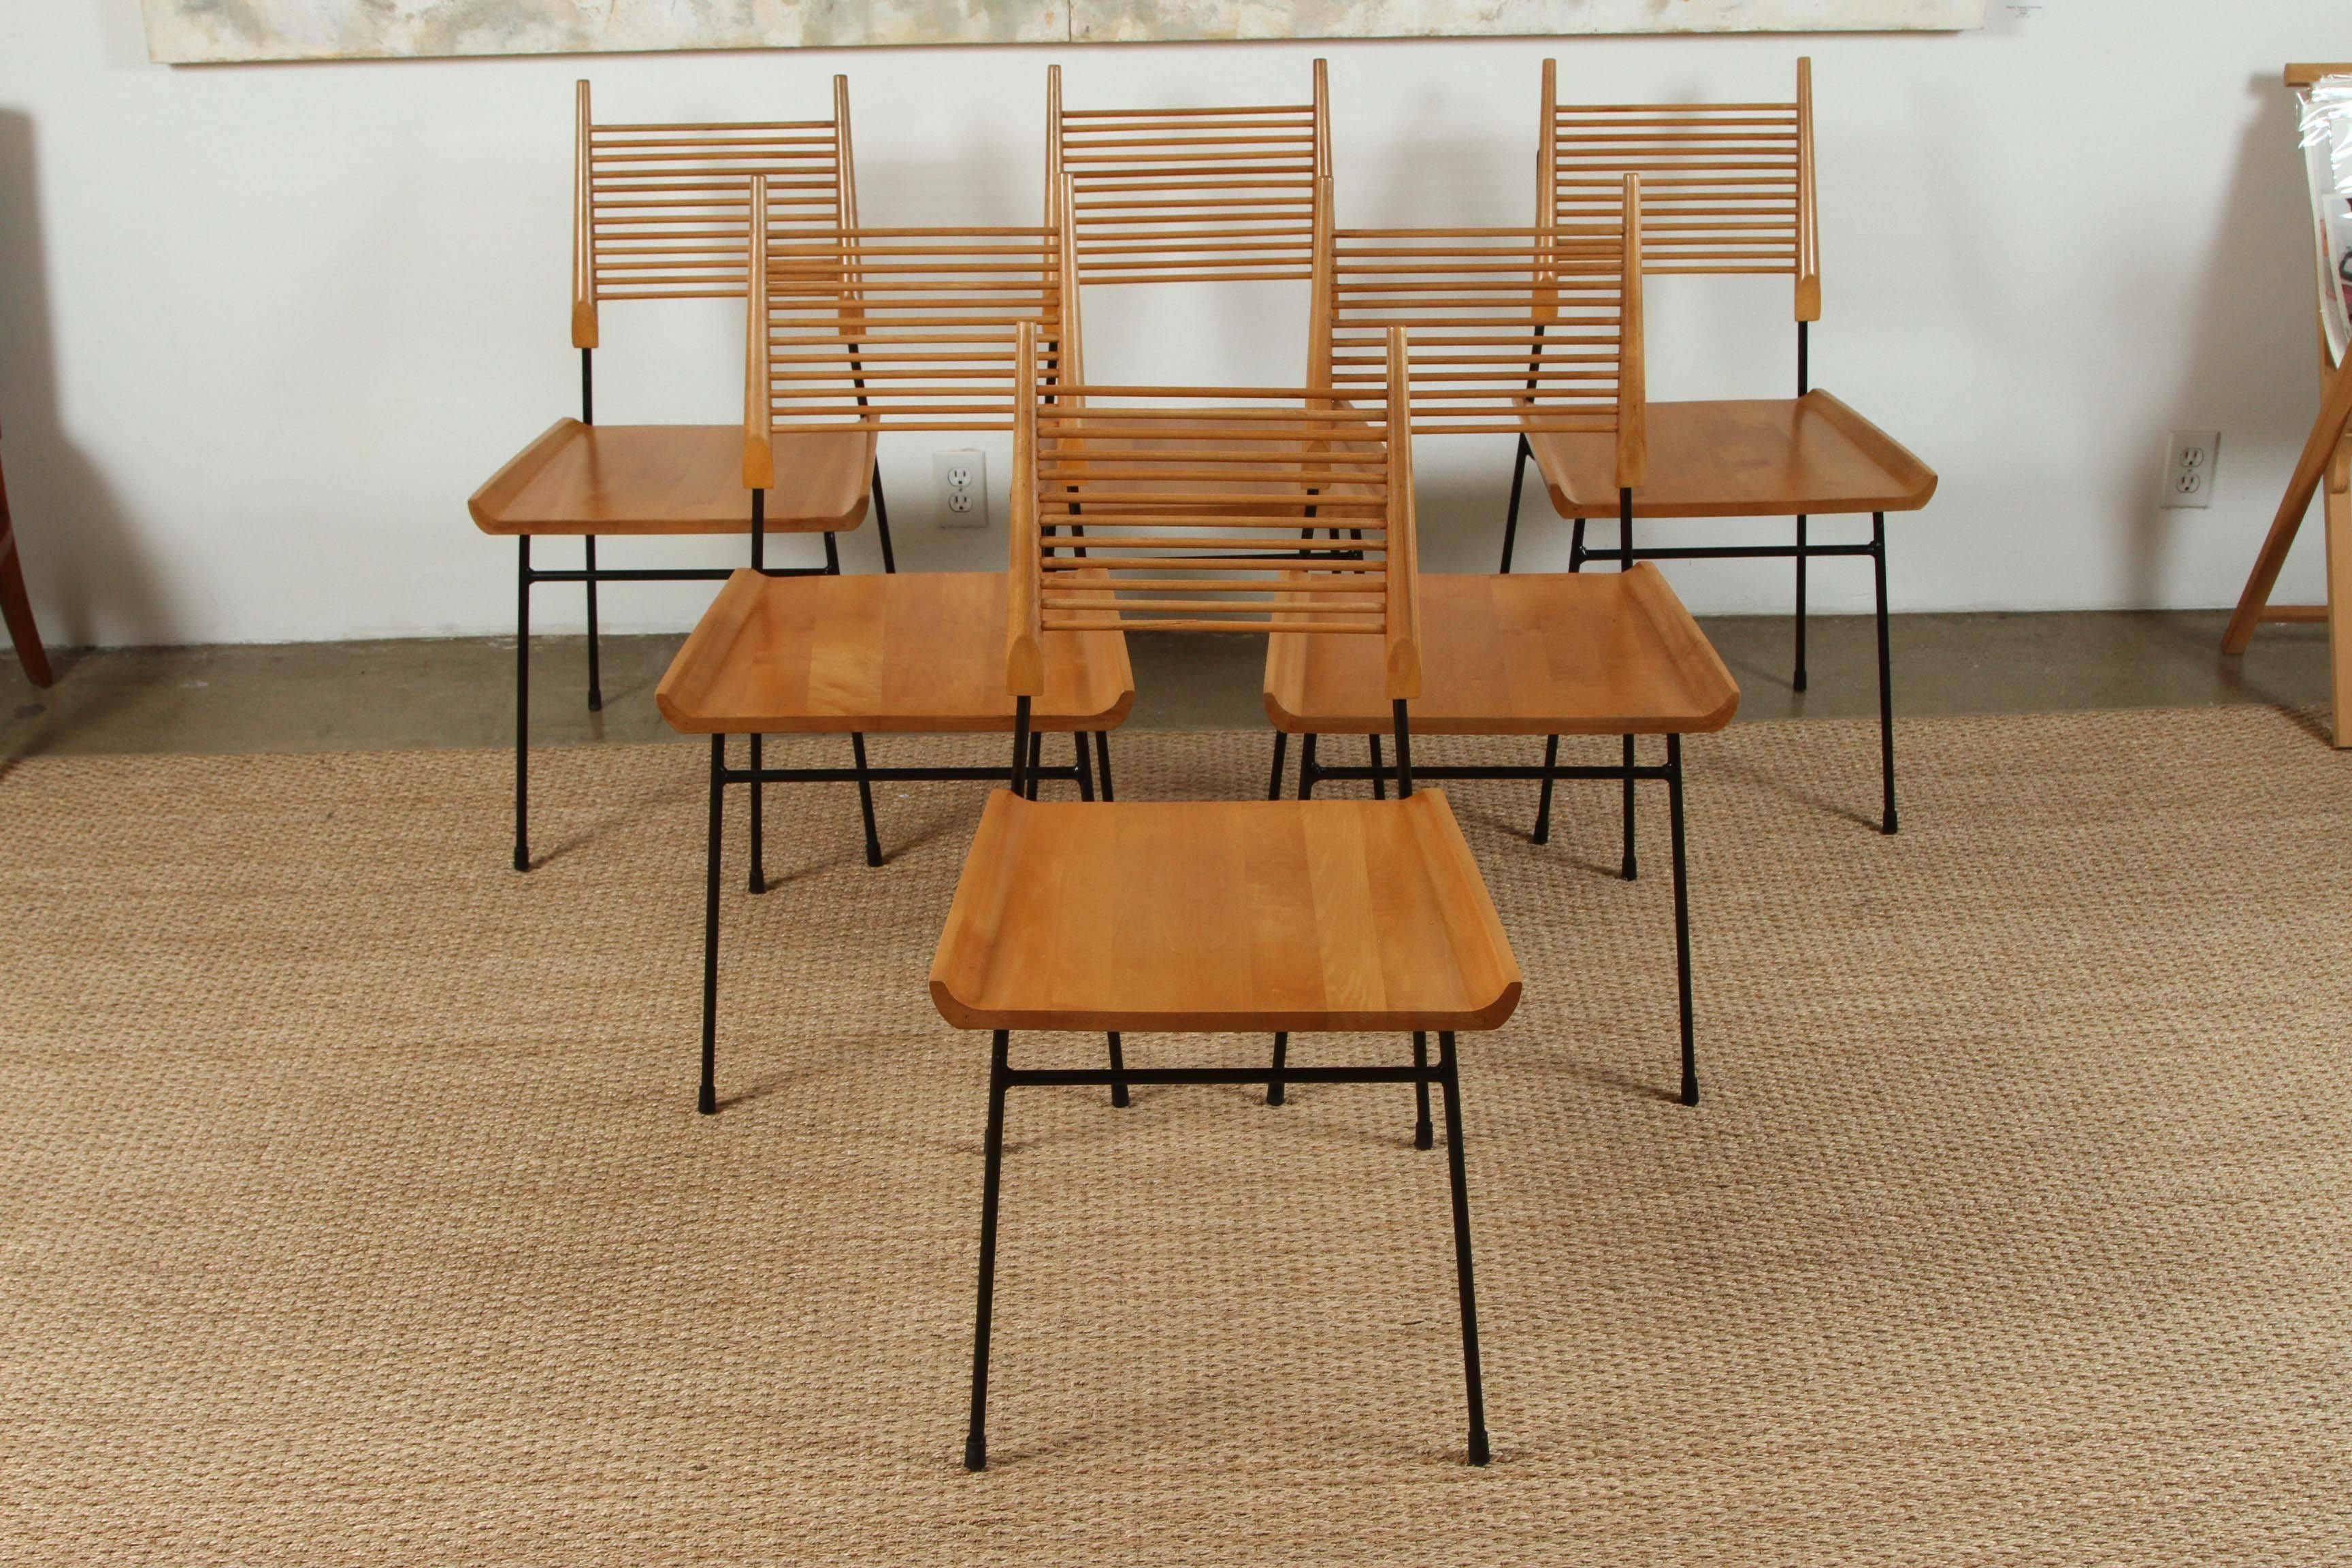 Paul McCobb maple and iron shovel chairs, circa 1950s in restored condition. Solid sculpted maple seat with turned spindle back supports on iron framework.

Paul McCobb (1917-1969) is an American designer best known for the Planner Group, his